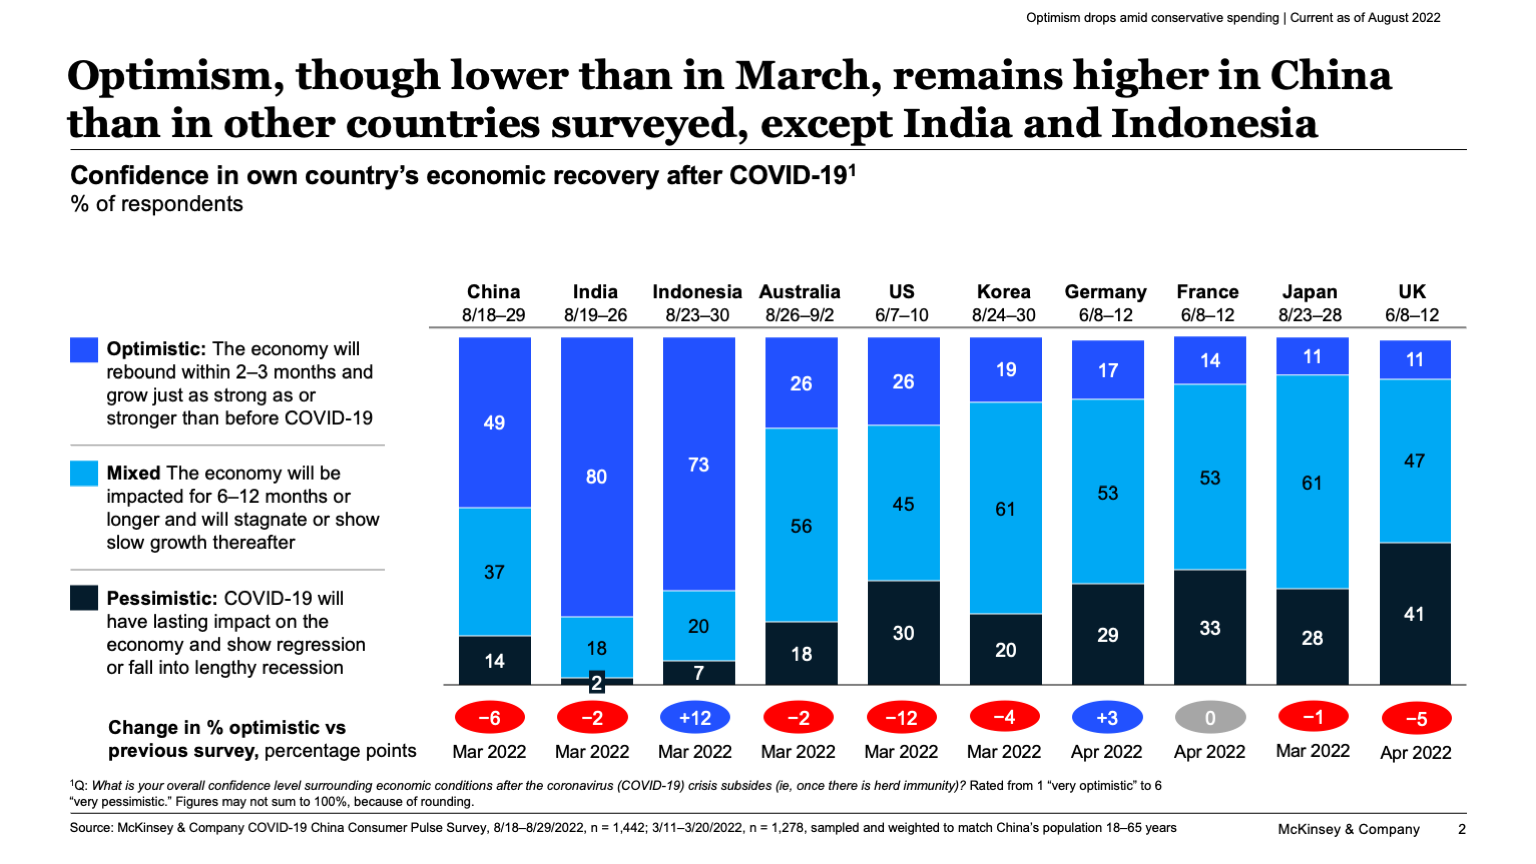 Optimism, though lower than in March, remains higher in China than in other countries surveyed, except India and Indonesia